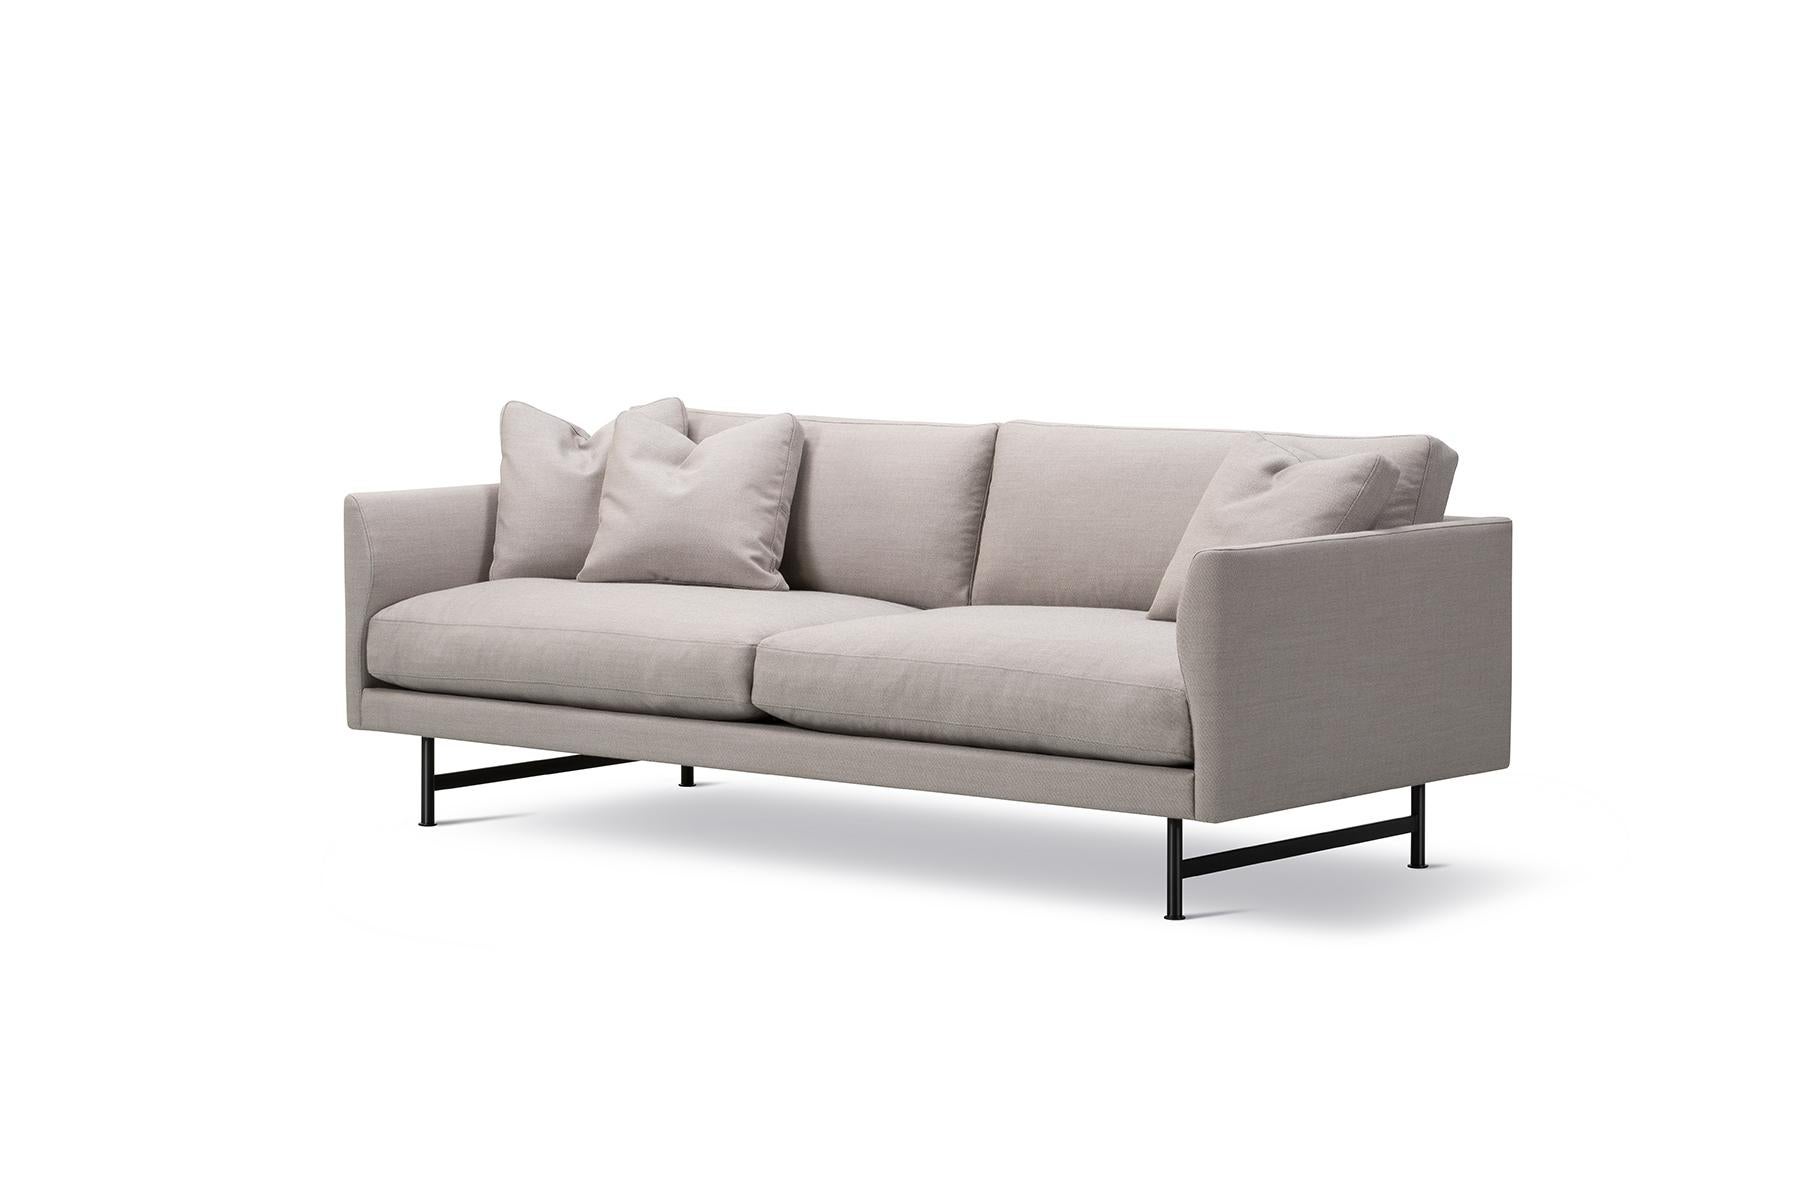 The Hugo Passos Calmo sofa 95 – 2-seater – Metal sofa offers a roomy sense of cosiness, where straight lines converge with discrete curved details. Comfy cushions complete the picture in this understated expression of elegance.